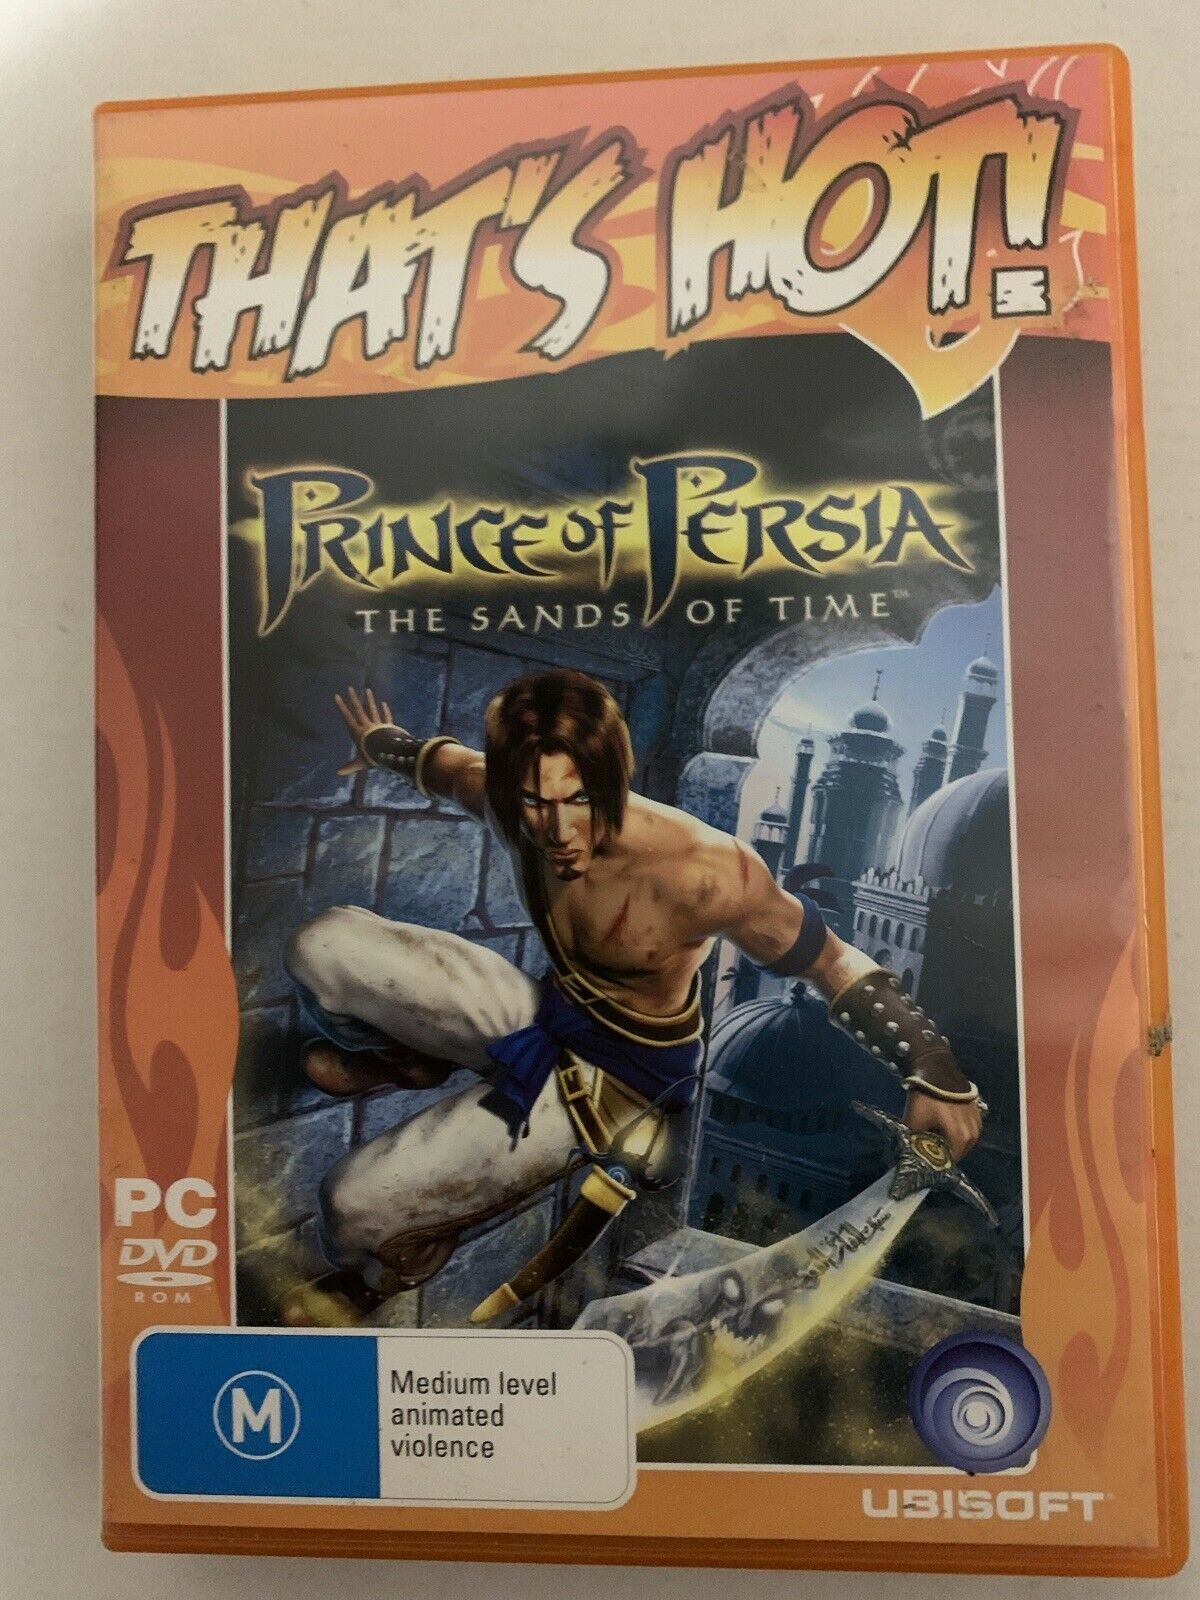 Prince of Persia: The Sands Of Time - PC DVD Action Windows Game